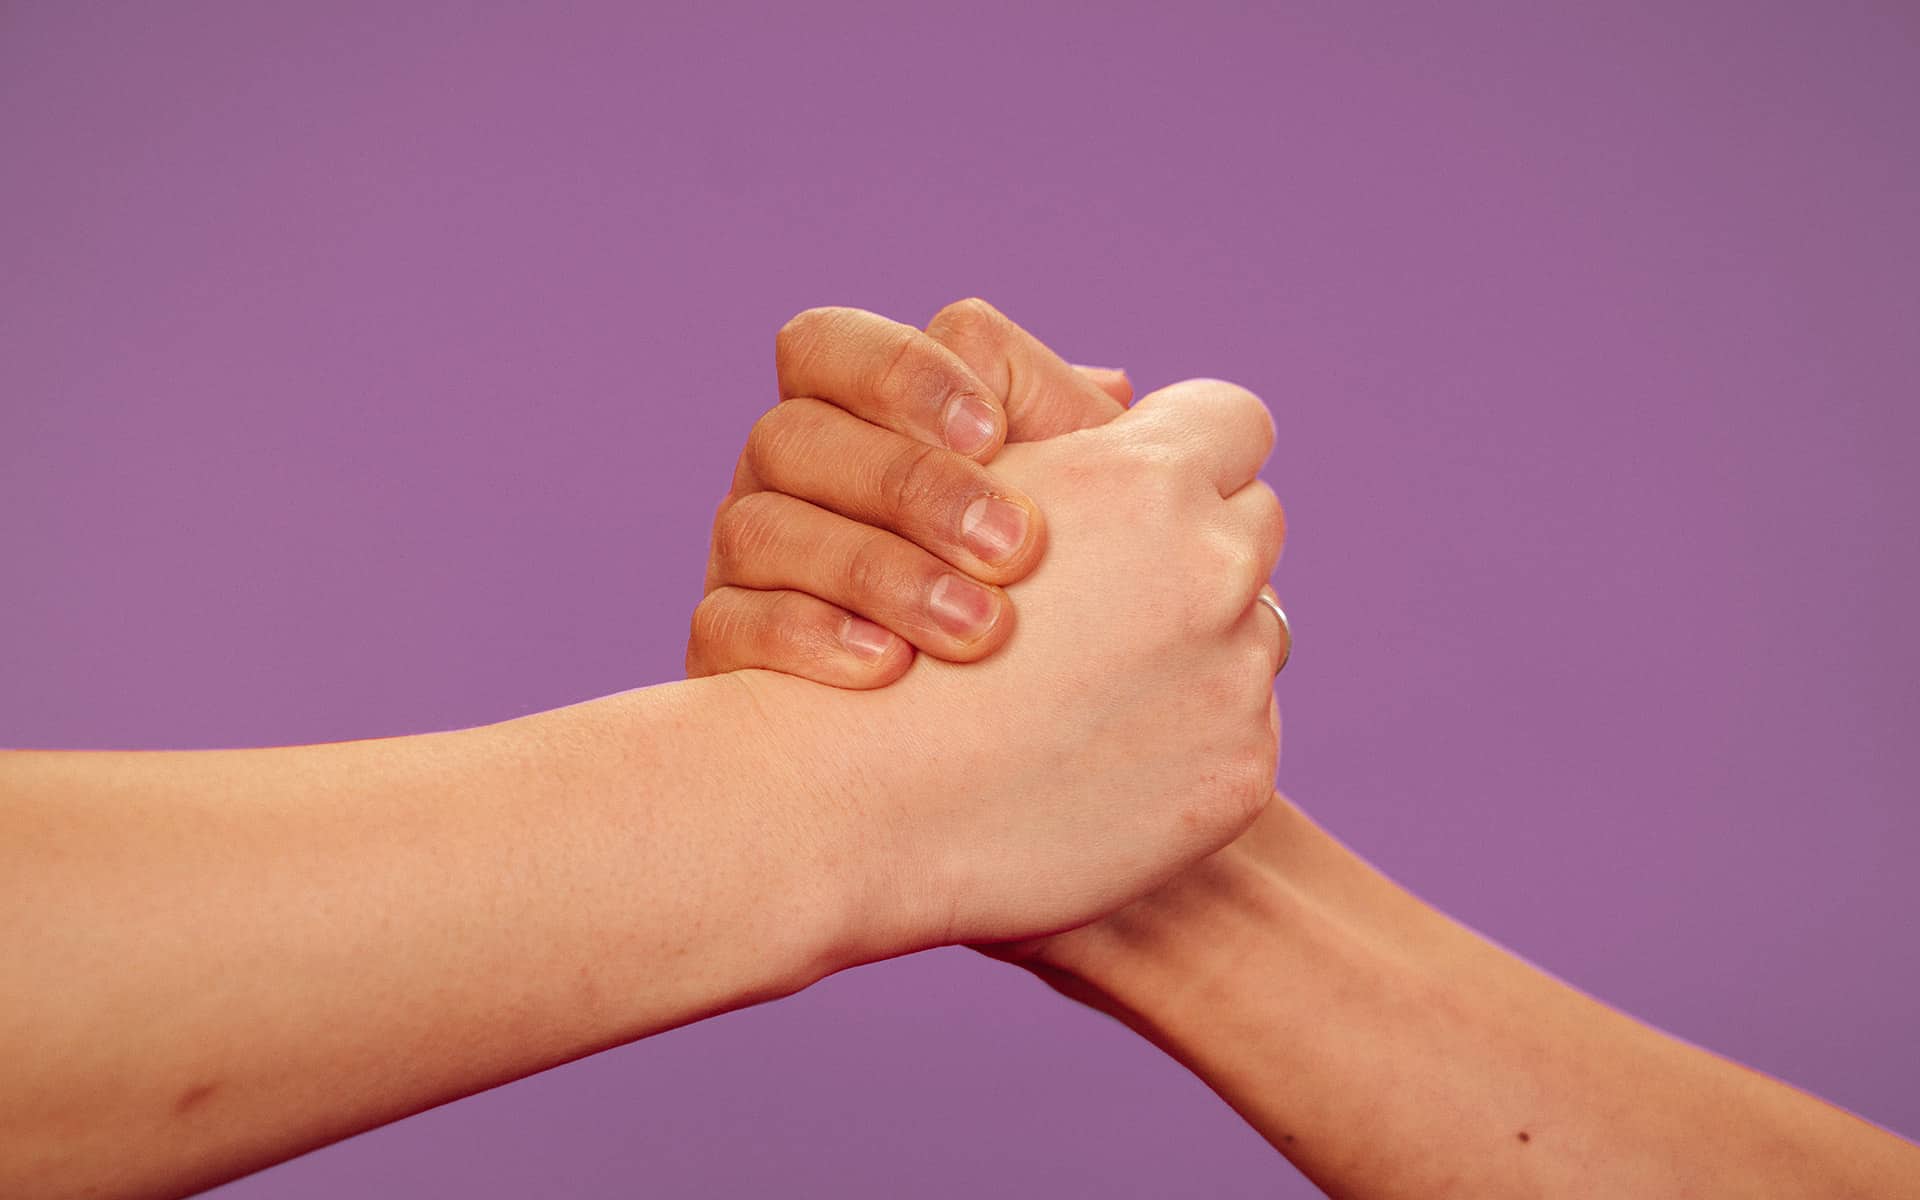 Hands embracing, in support for each other 